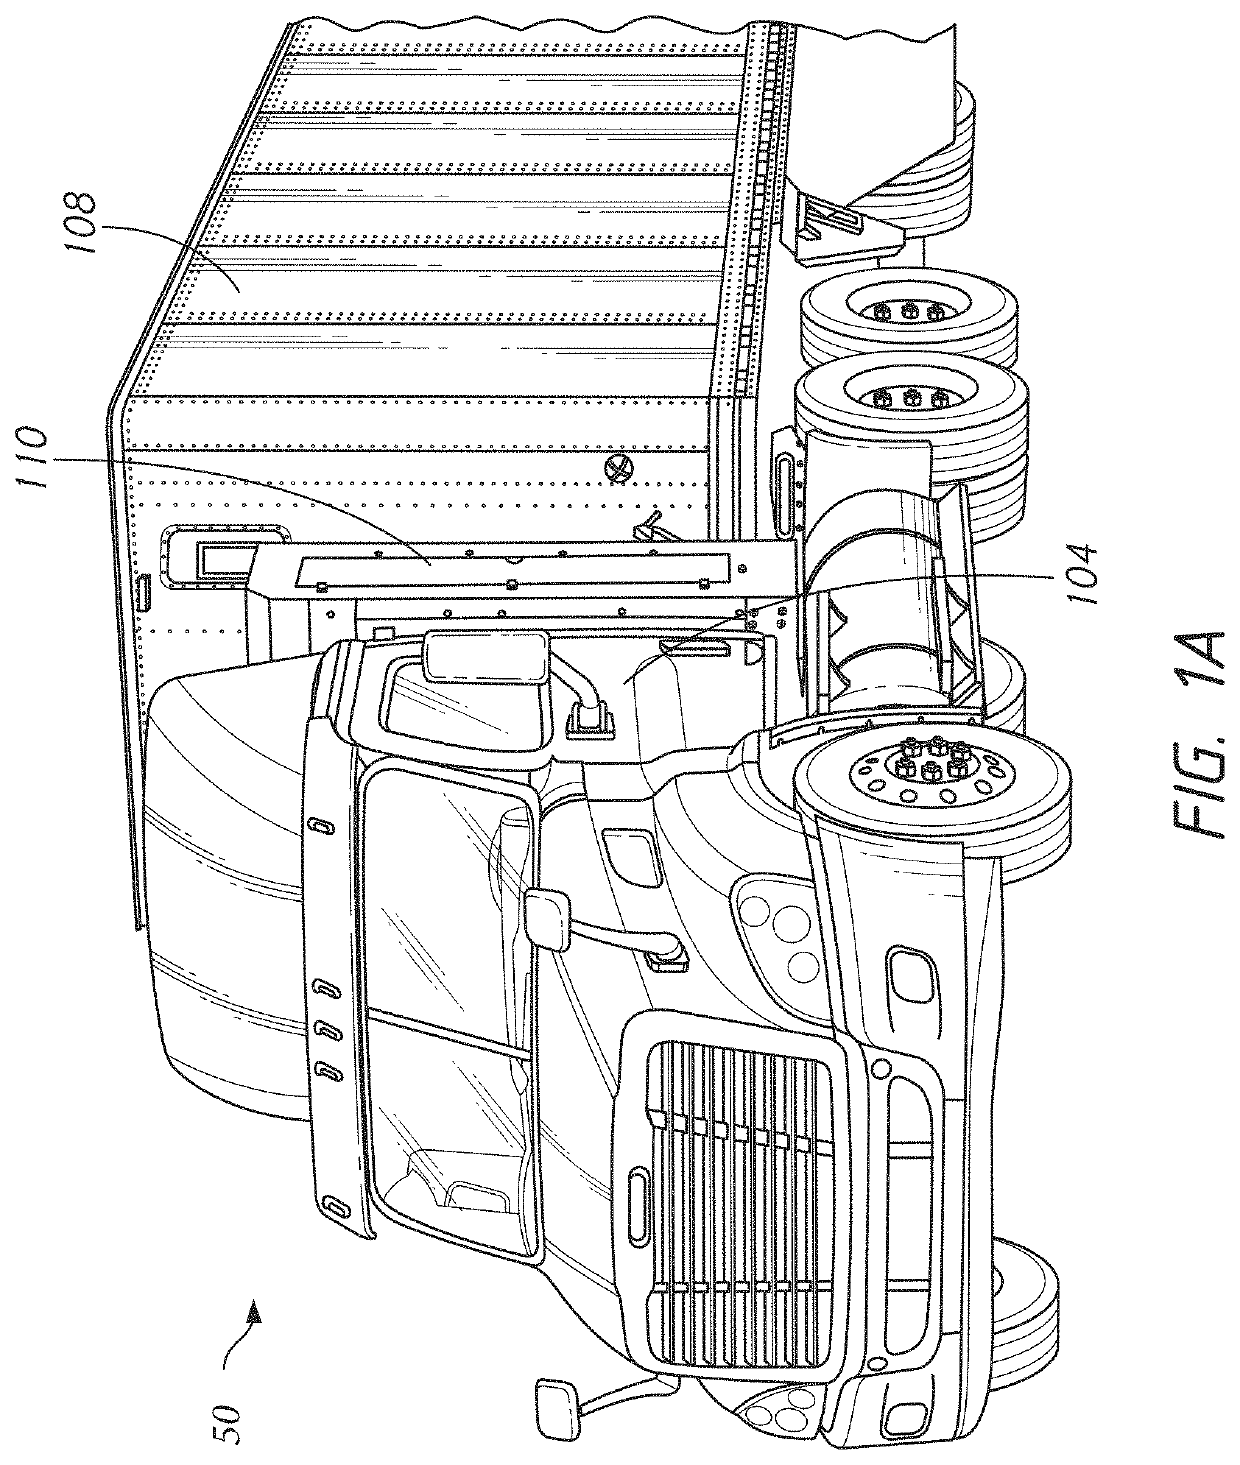 Battery system for heavy duty vehicles